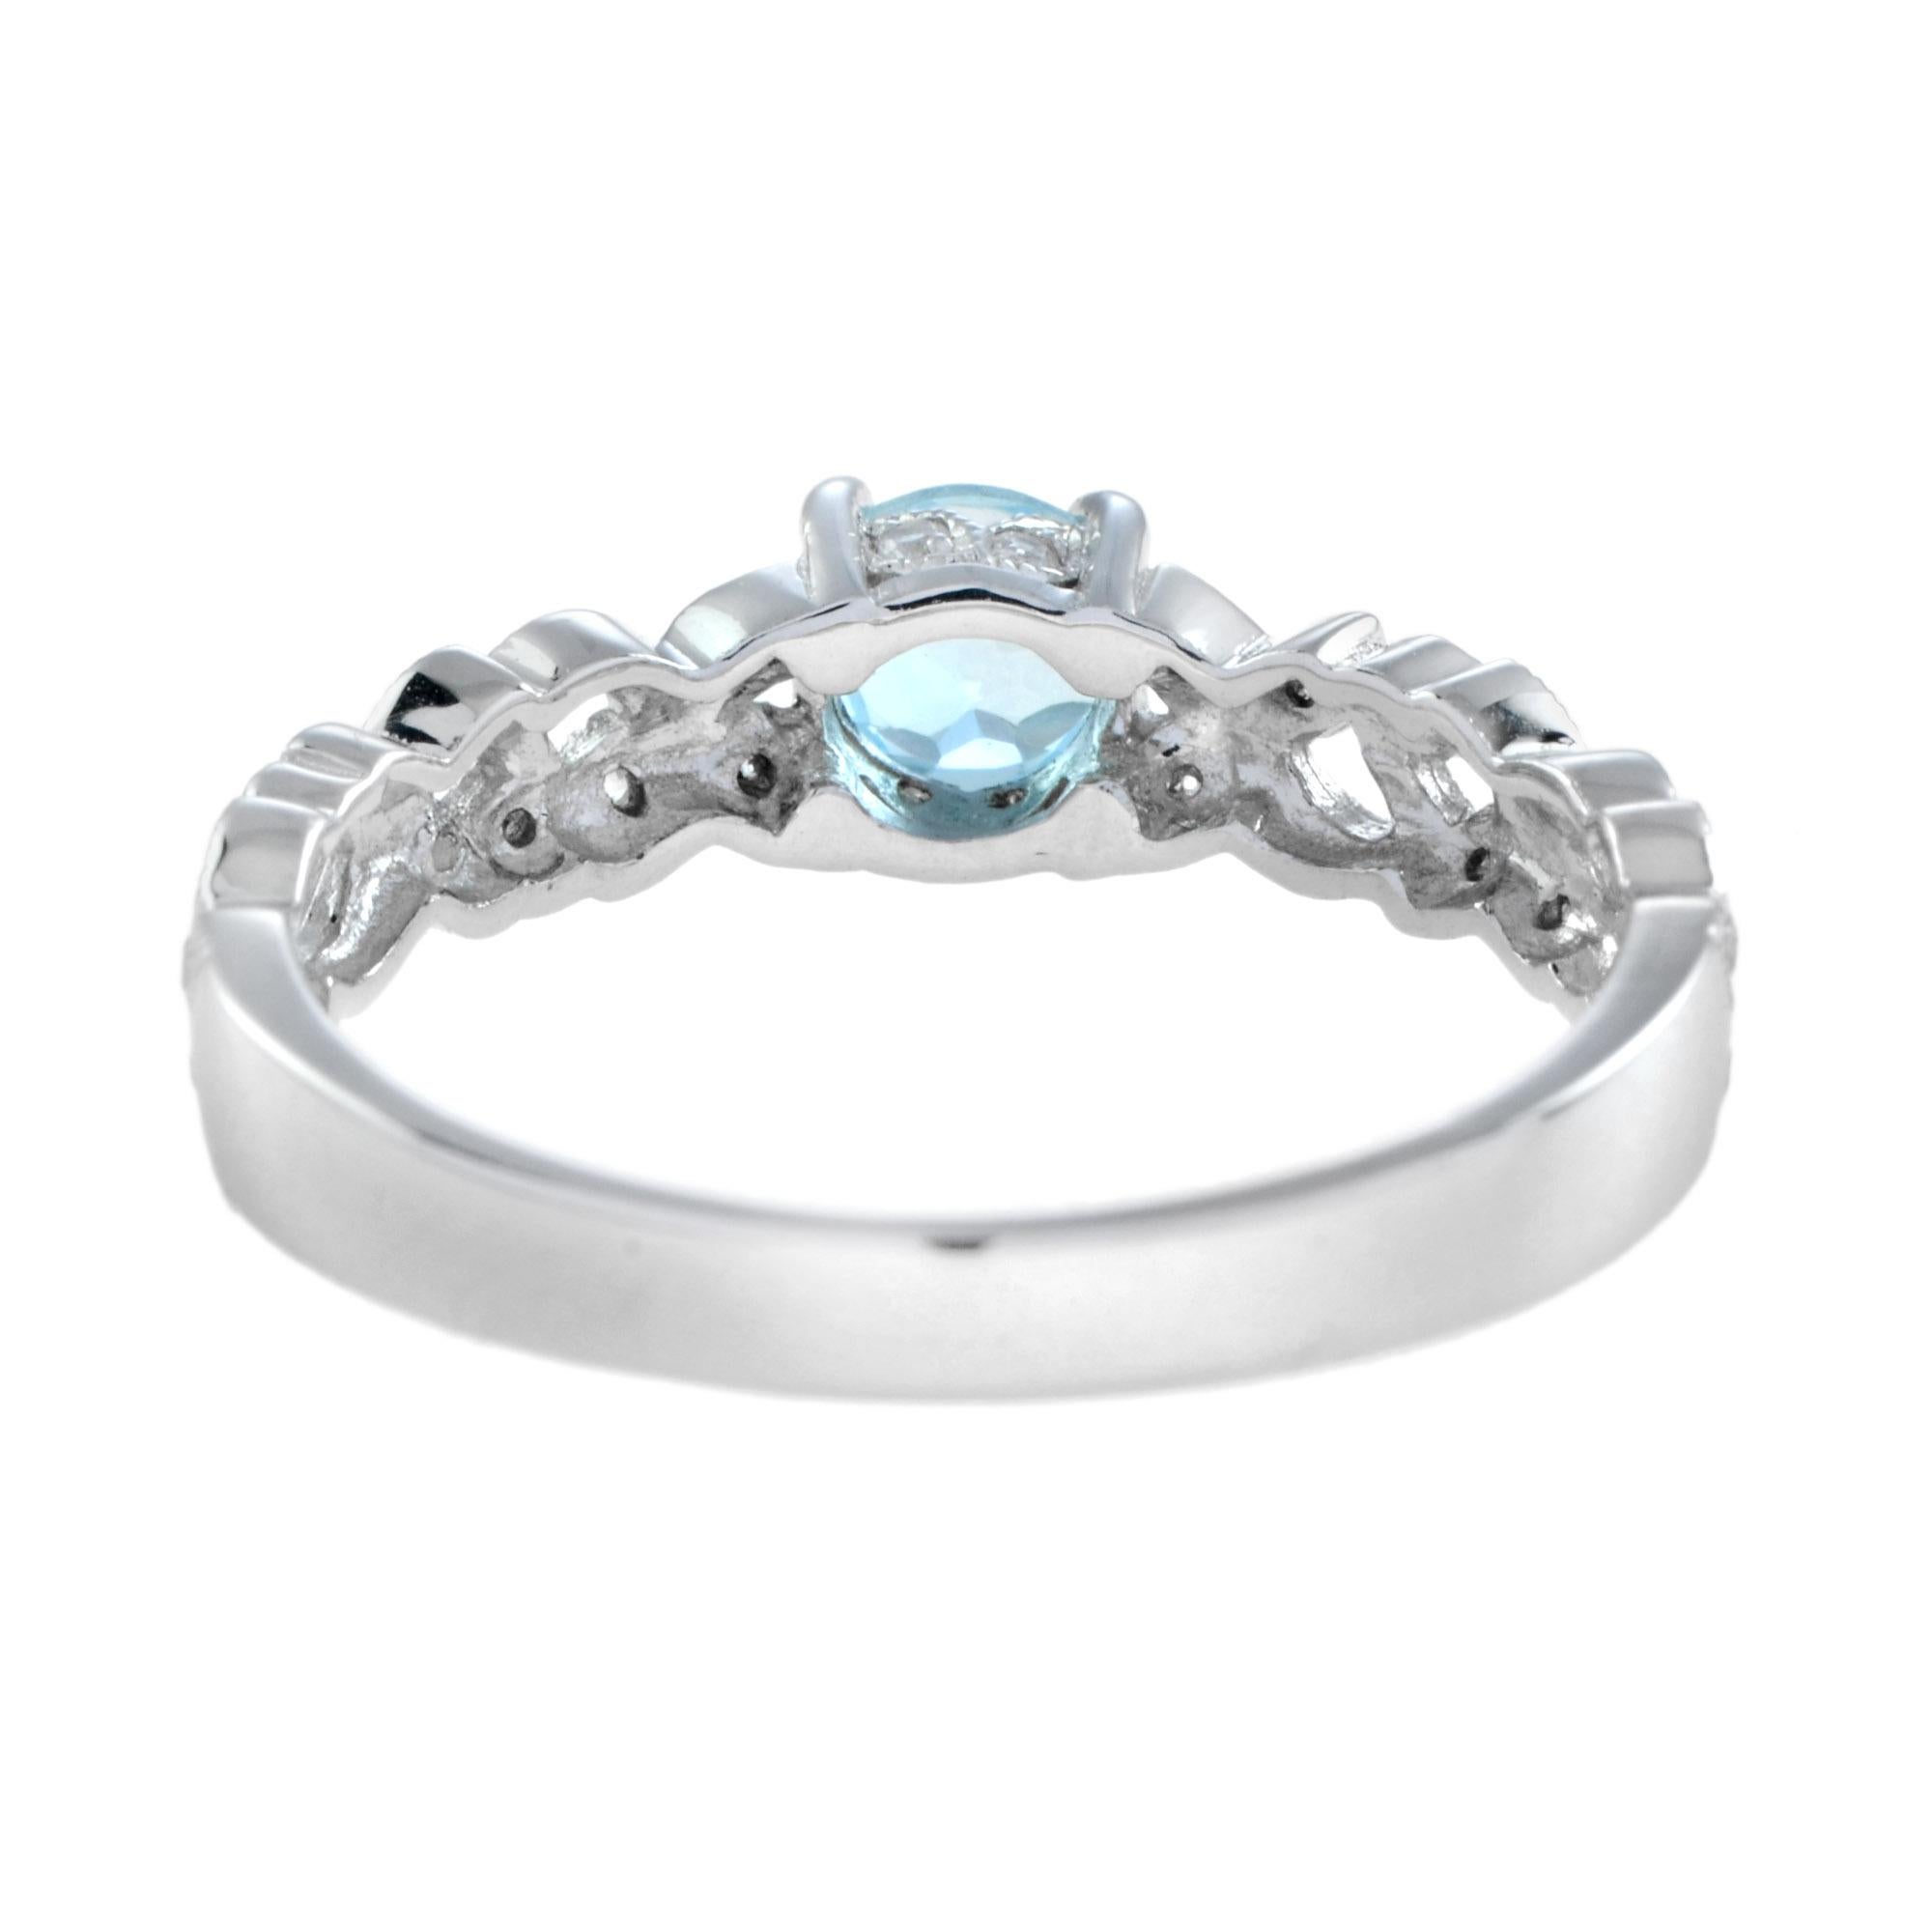 For Sale:  One Round Blue Topaz with Diamond Filigree Band Ring in 14K White Gold 4